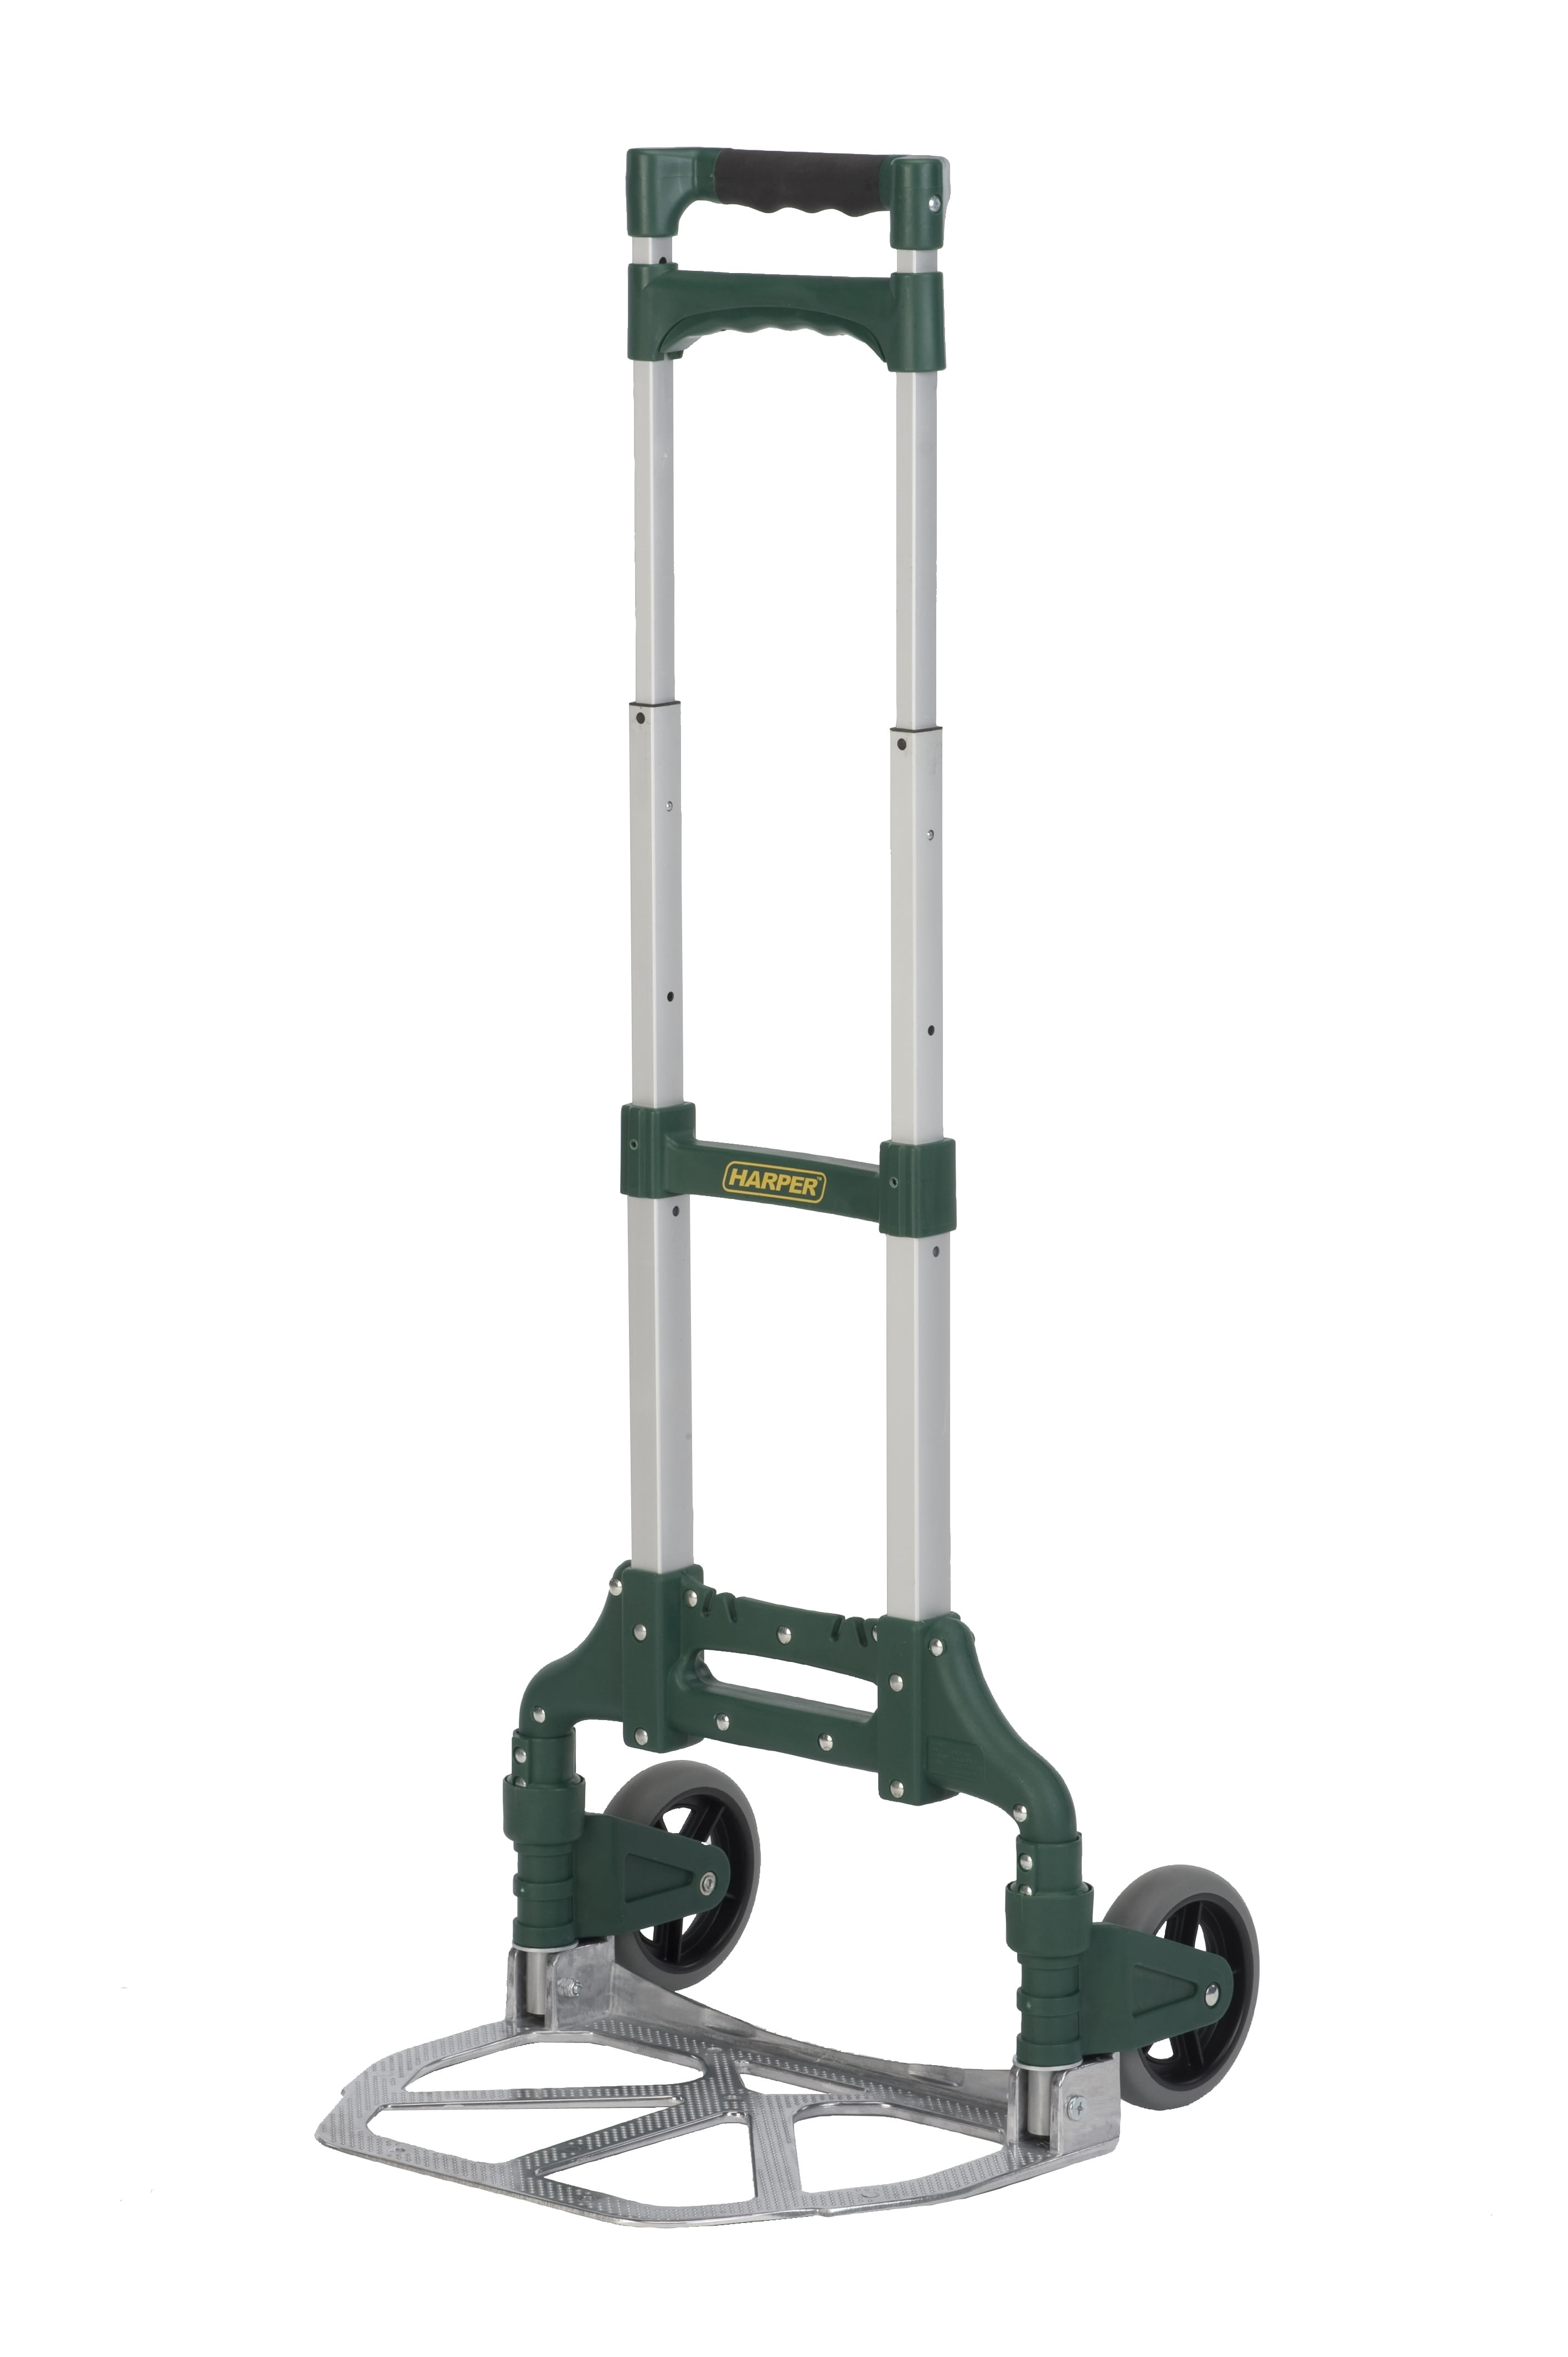 Zinnor Hand Truck 2 in 1 Aluminum Folding Hand Truck 770LBS 51Inch Height Convertible Hand Truck Foldable with 2 Wheel Dolly and 4 Wheel Cart 